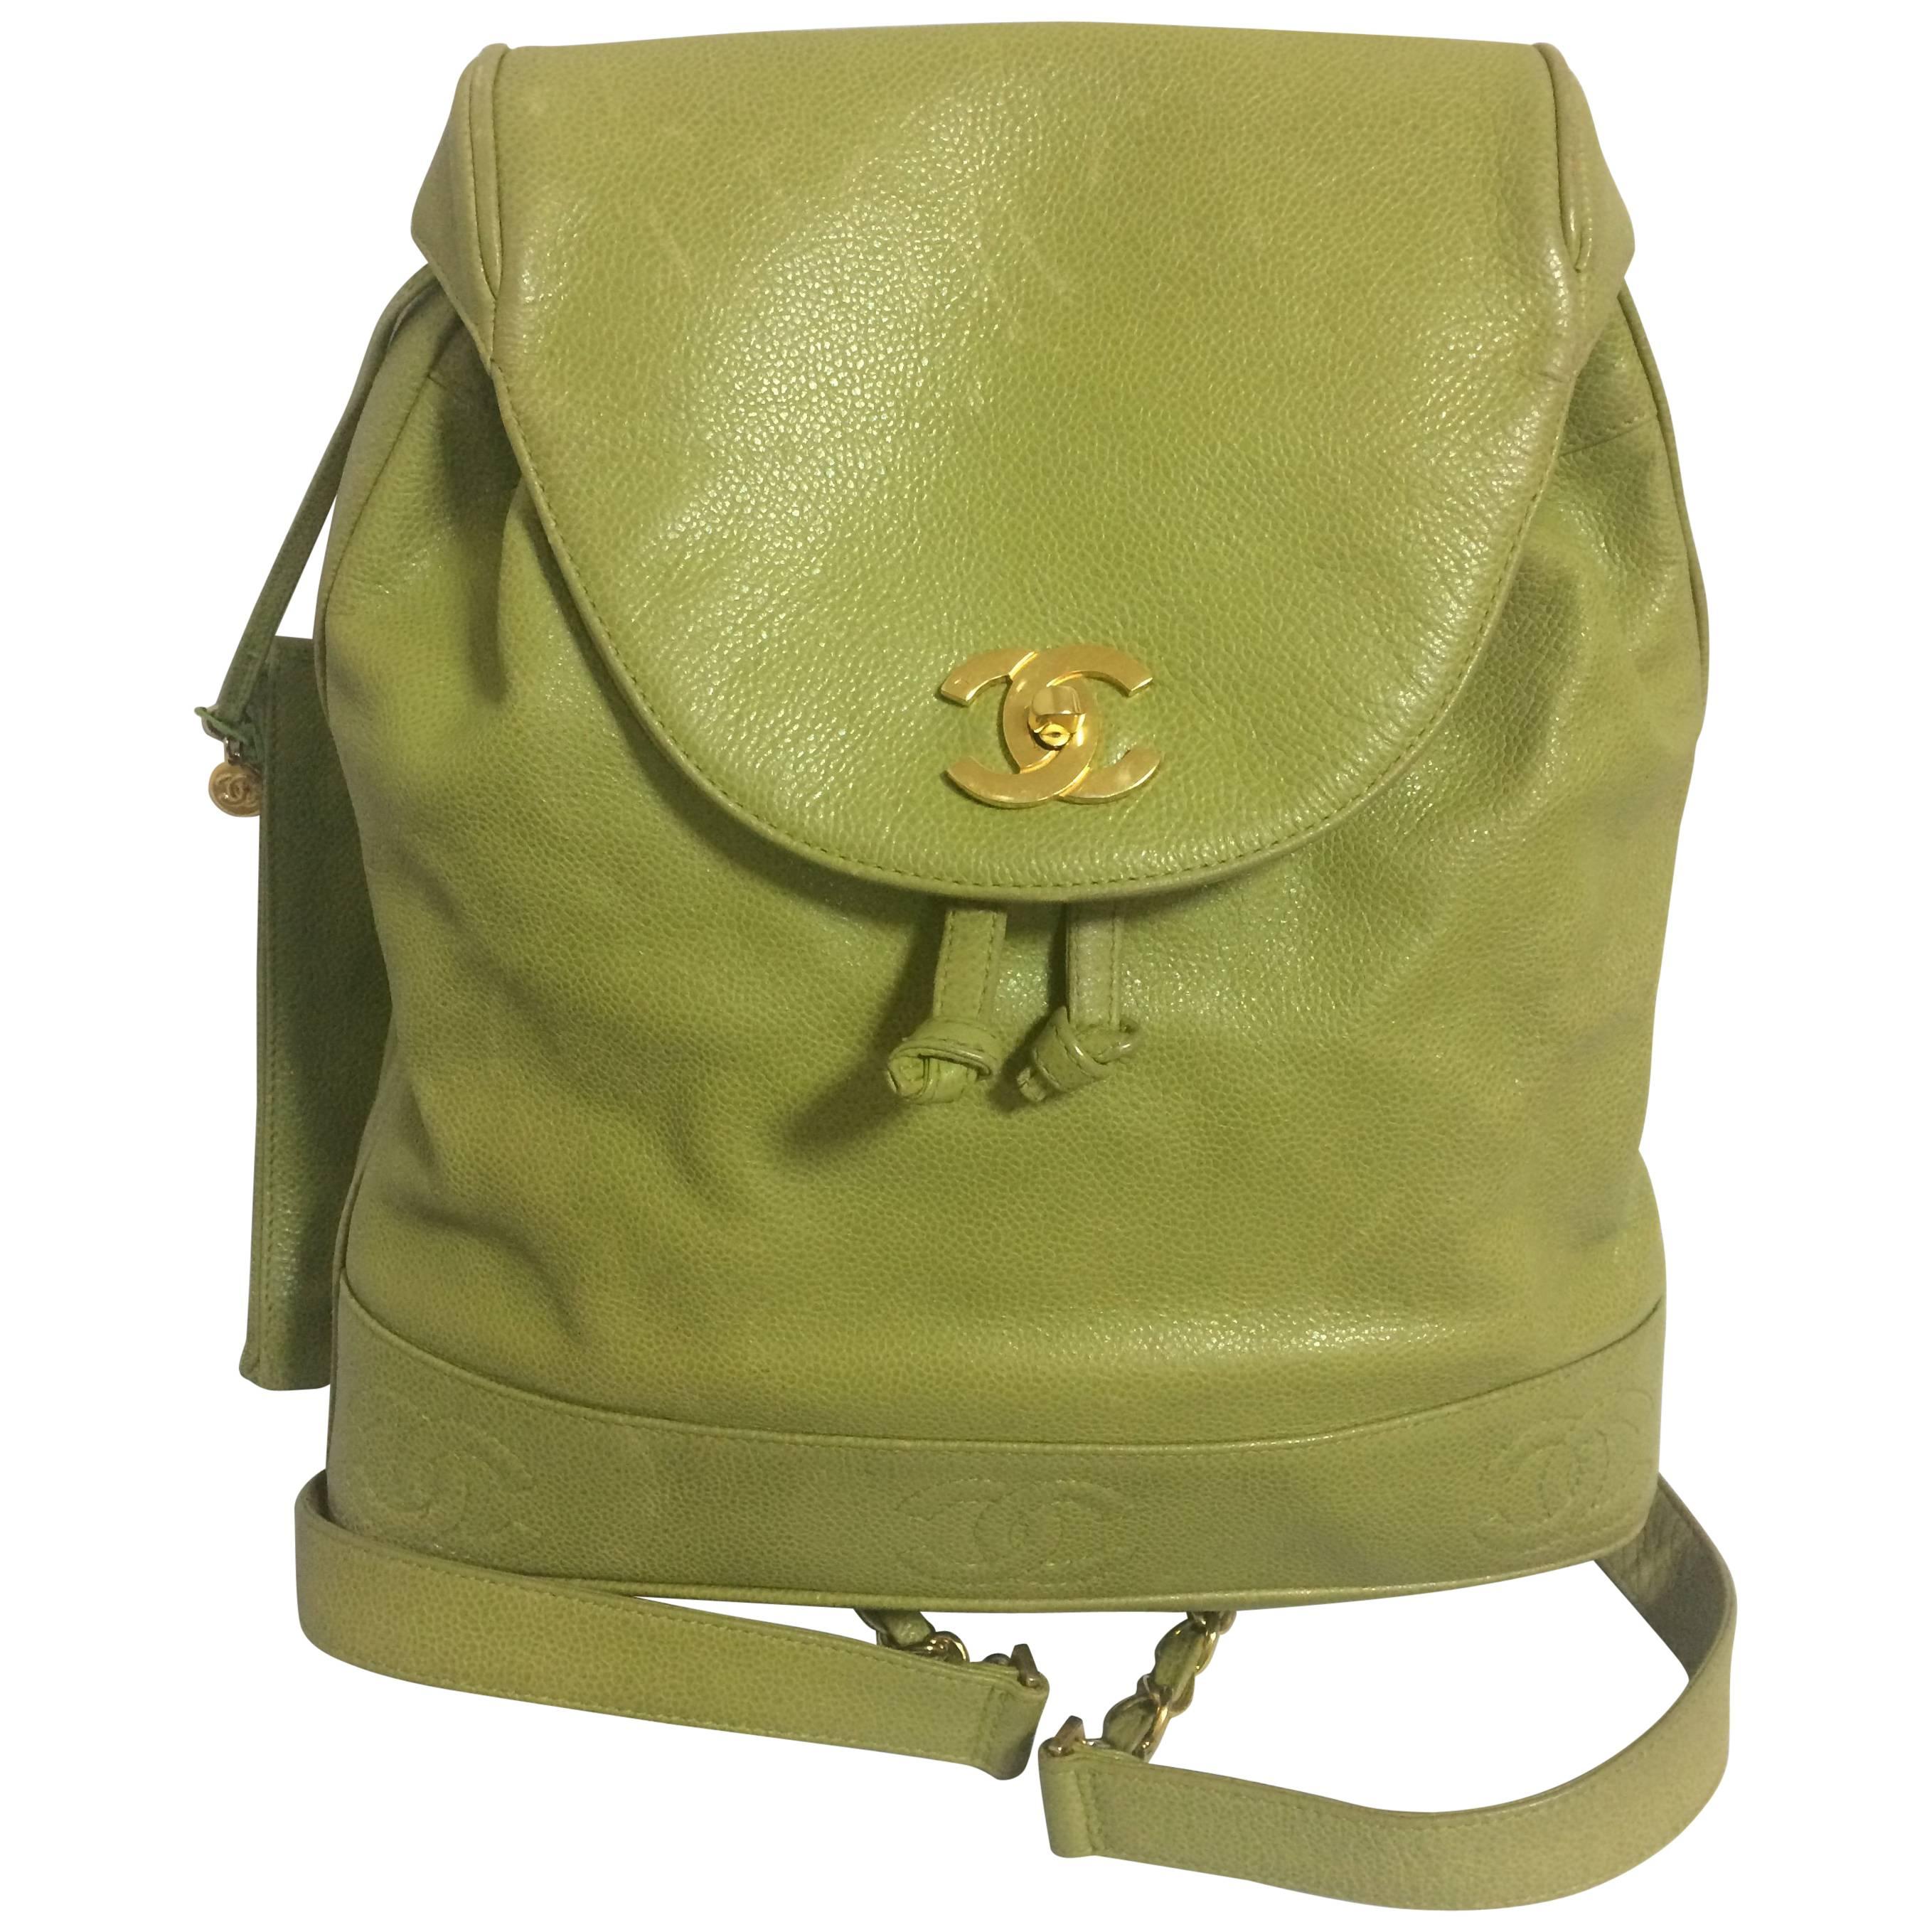 Vintage CHANEL green caviar leather backpack with gold chain strap and CC motif. For Sale